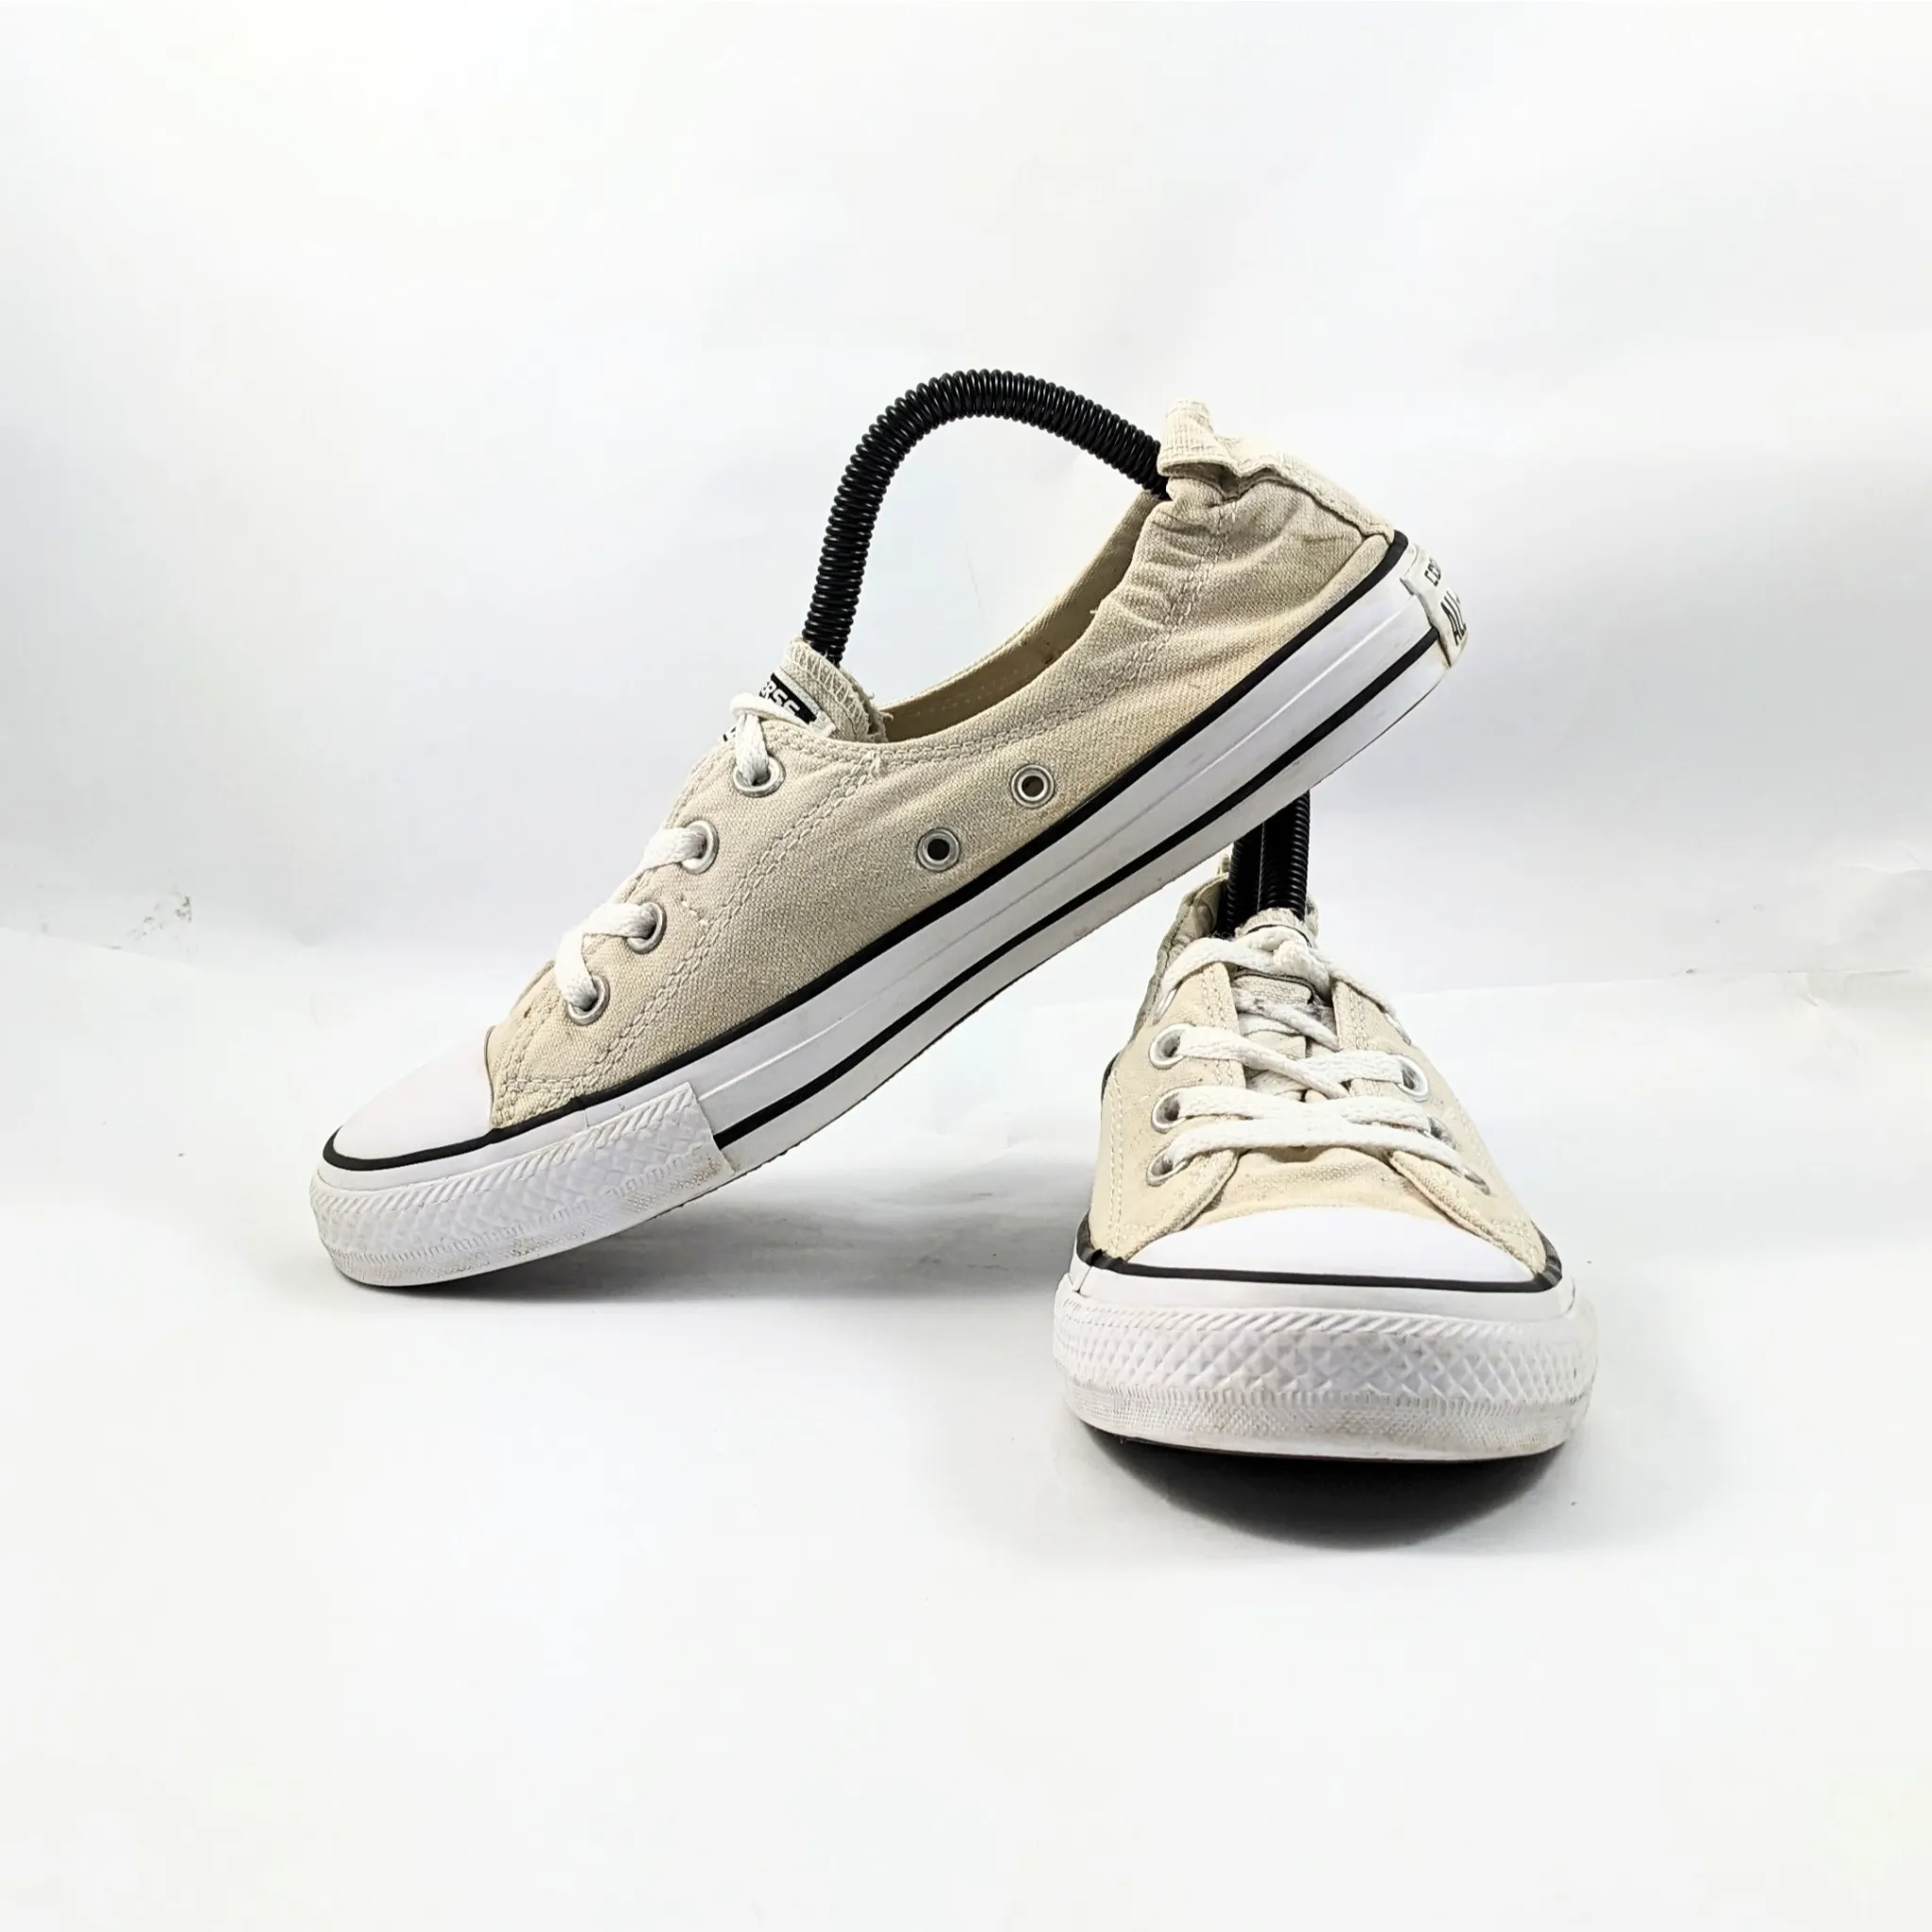 Converse White Sneakers